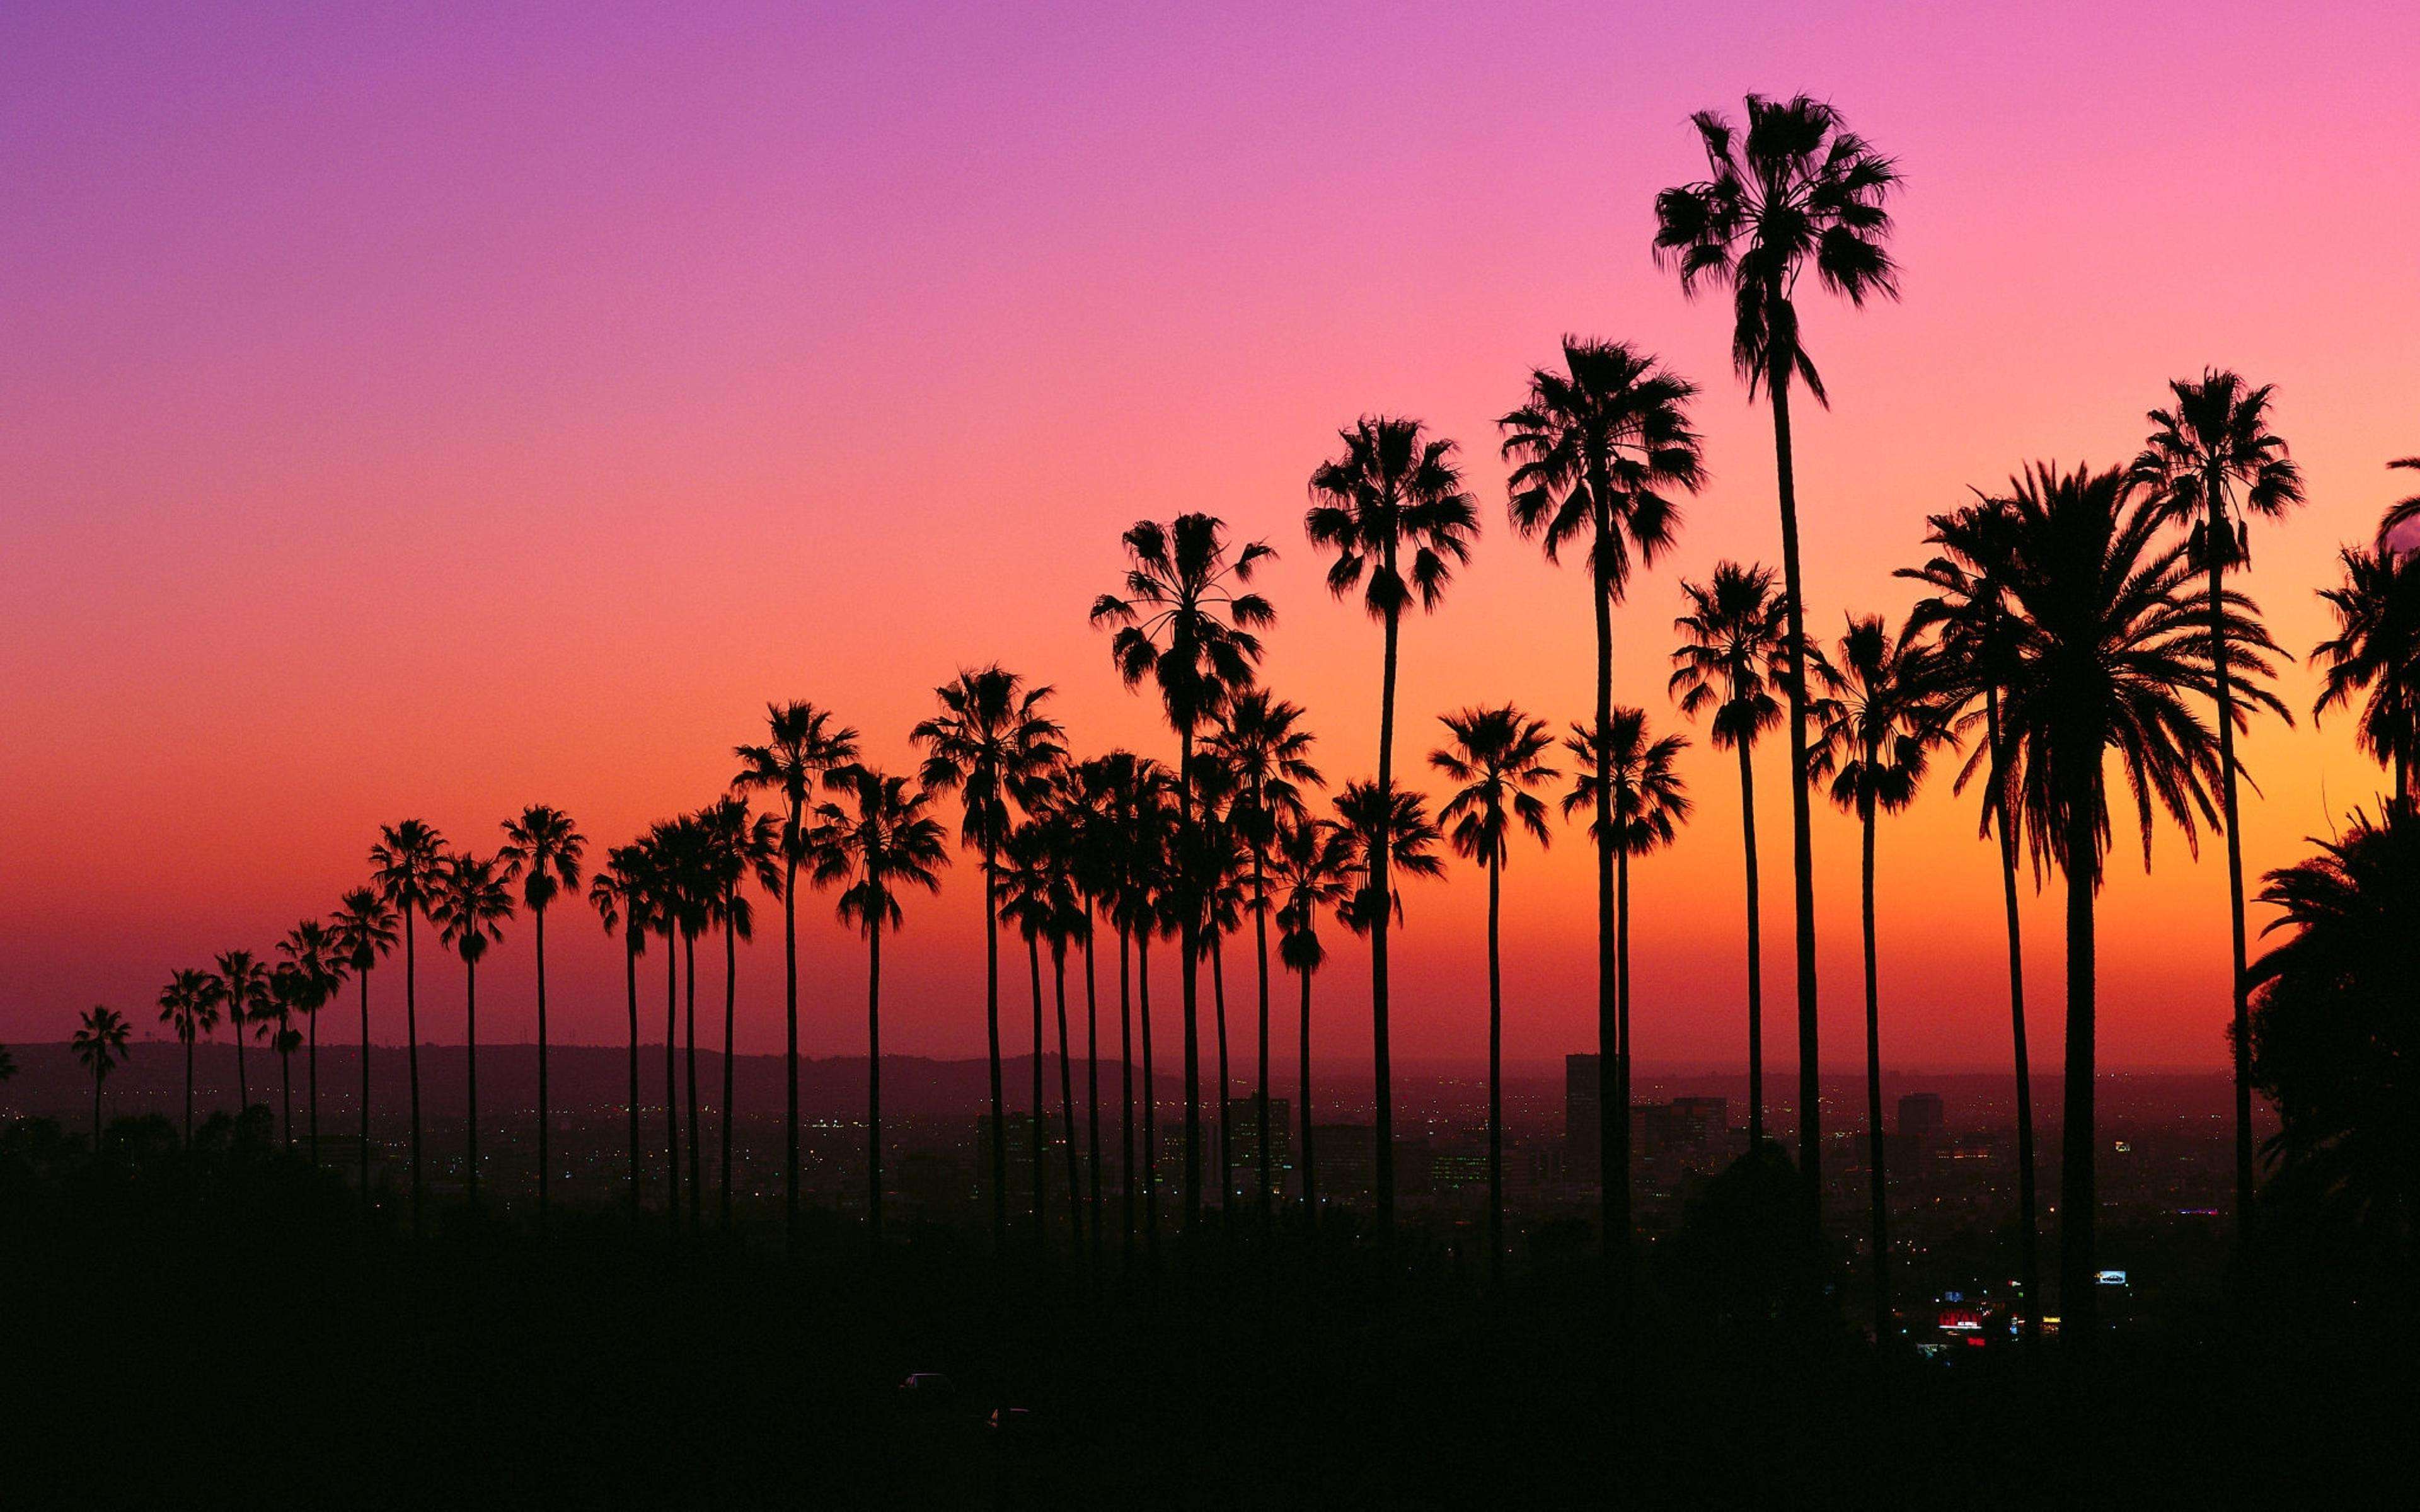 4k Los Angeles Sunset Wallpapers Wallpaper Cave